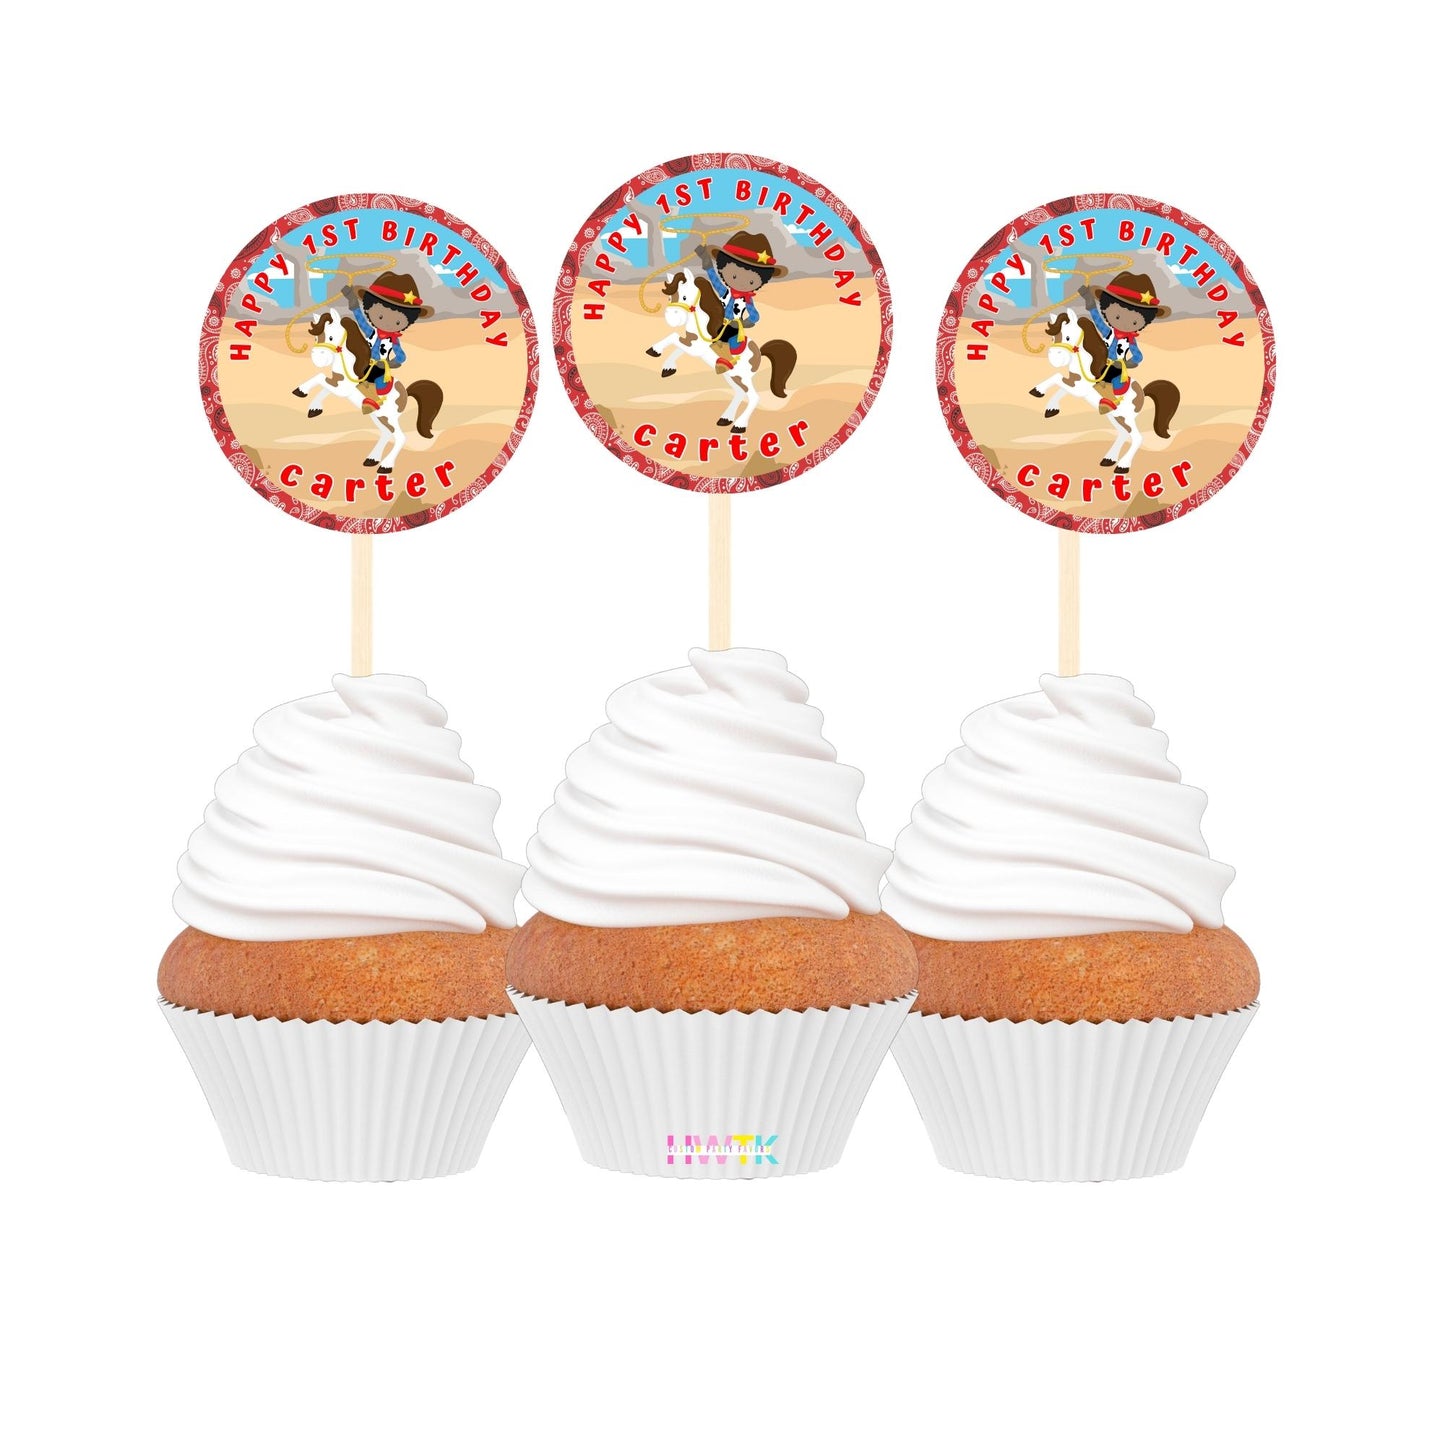 Cowboy Birthday Party Personalized 2” round Cupcake Toppers 12pc